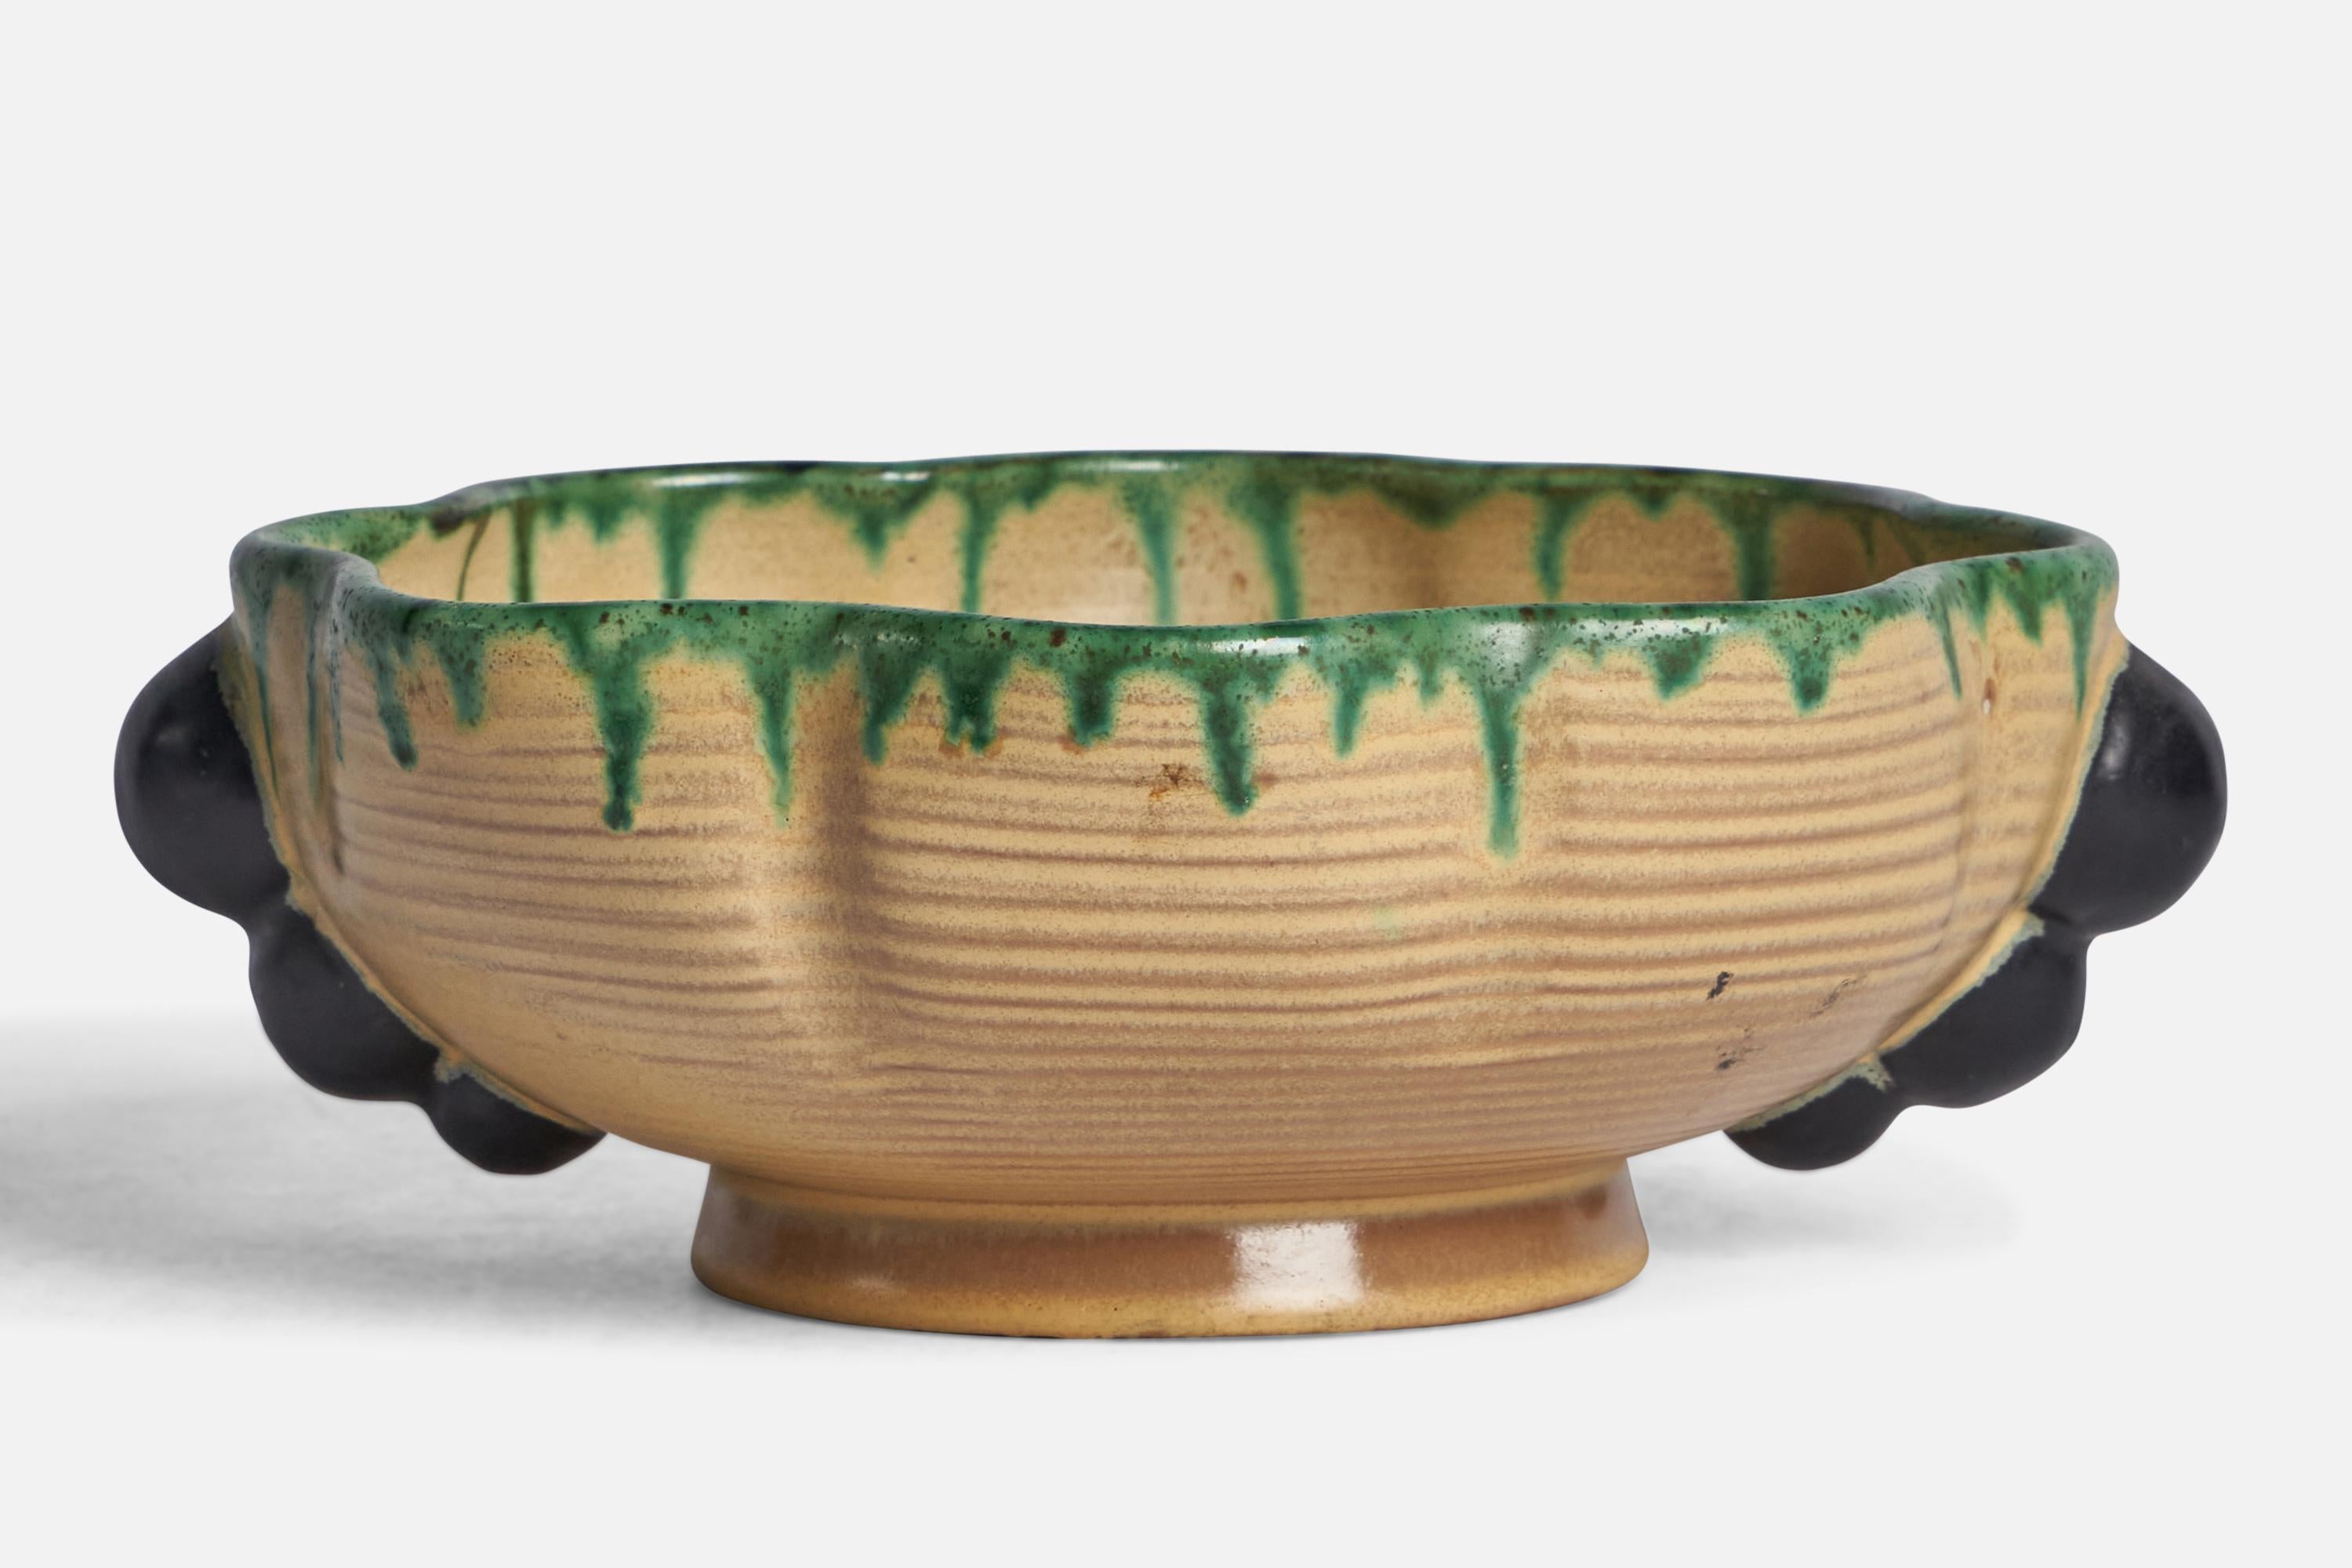 A green beige and black-glazed incised stoneware bowl designed and produced by Andersson & Johansson, Sweden, 1950s.